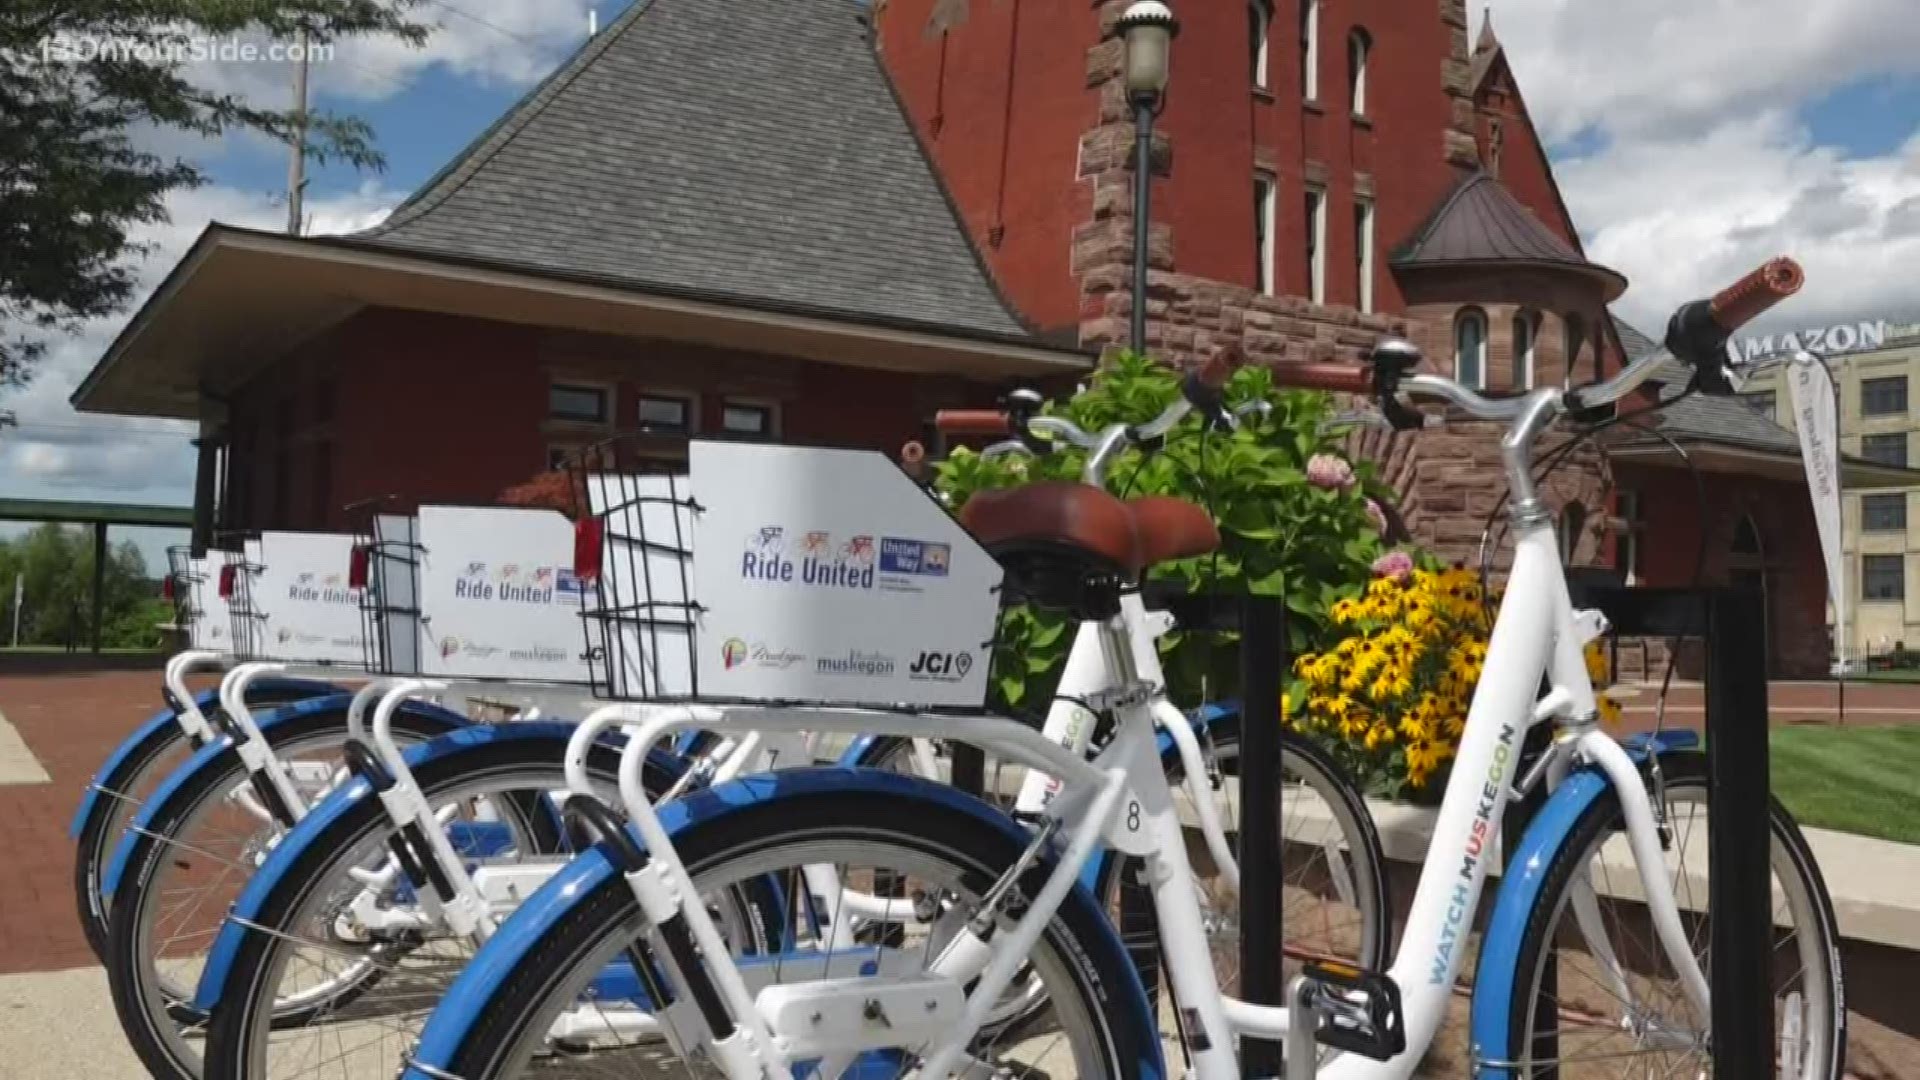 You can now rent bikes at two locations.